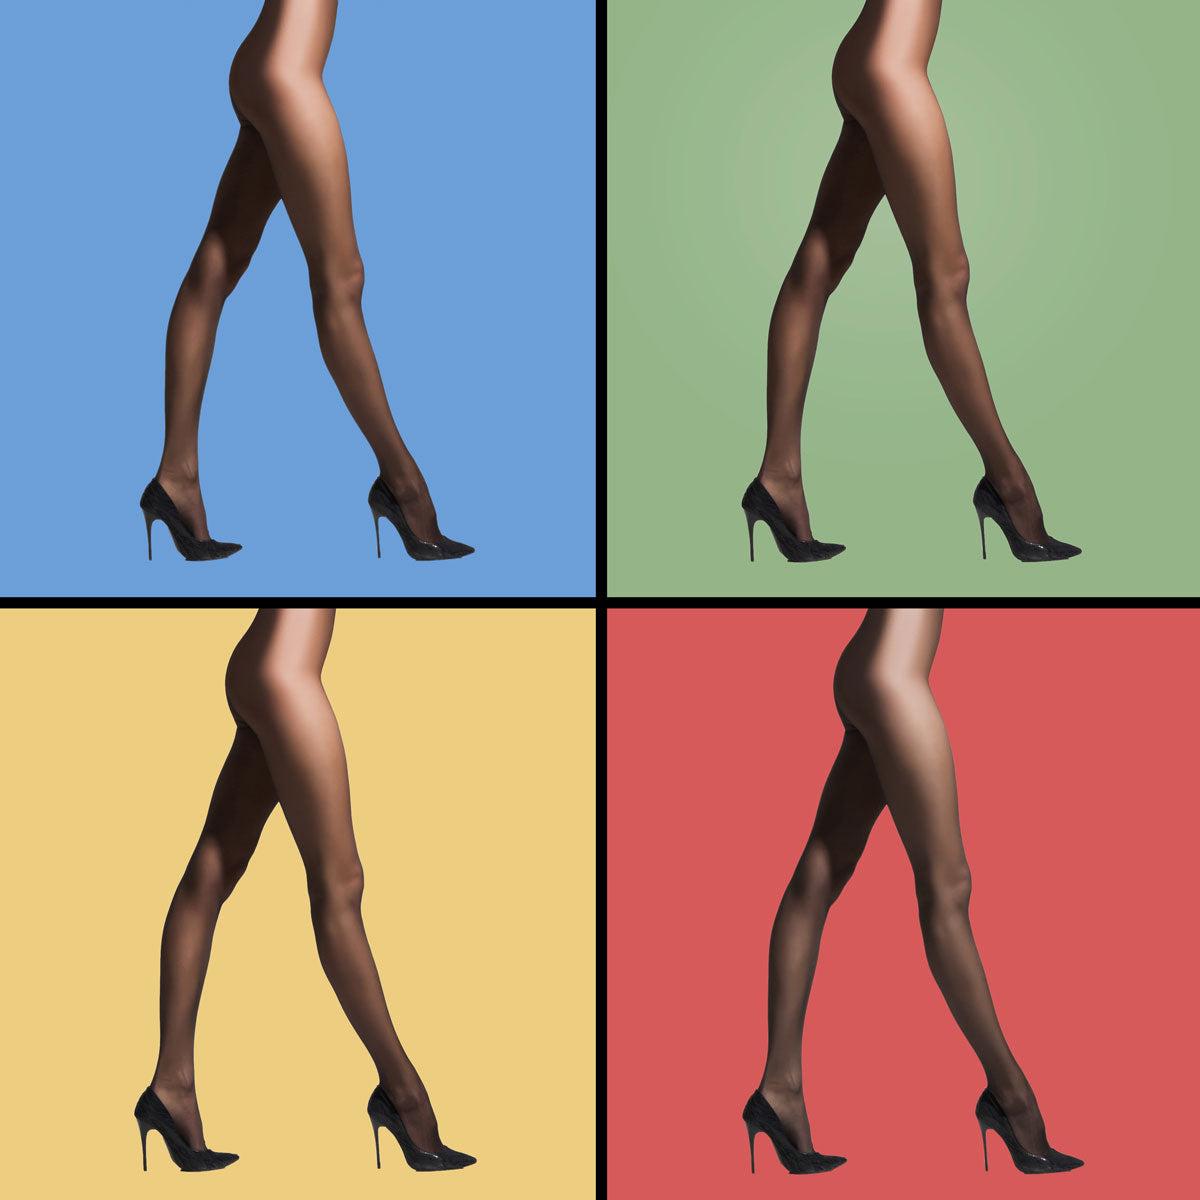 Are Pantyhose Meant To Be Worn With or Without Underwear? 